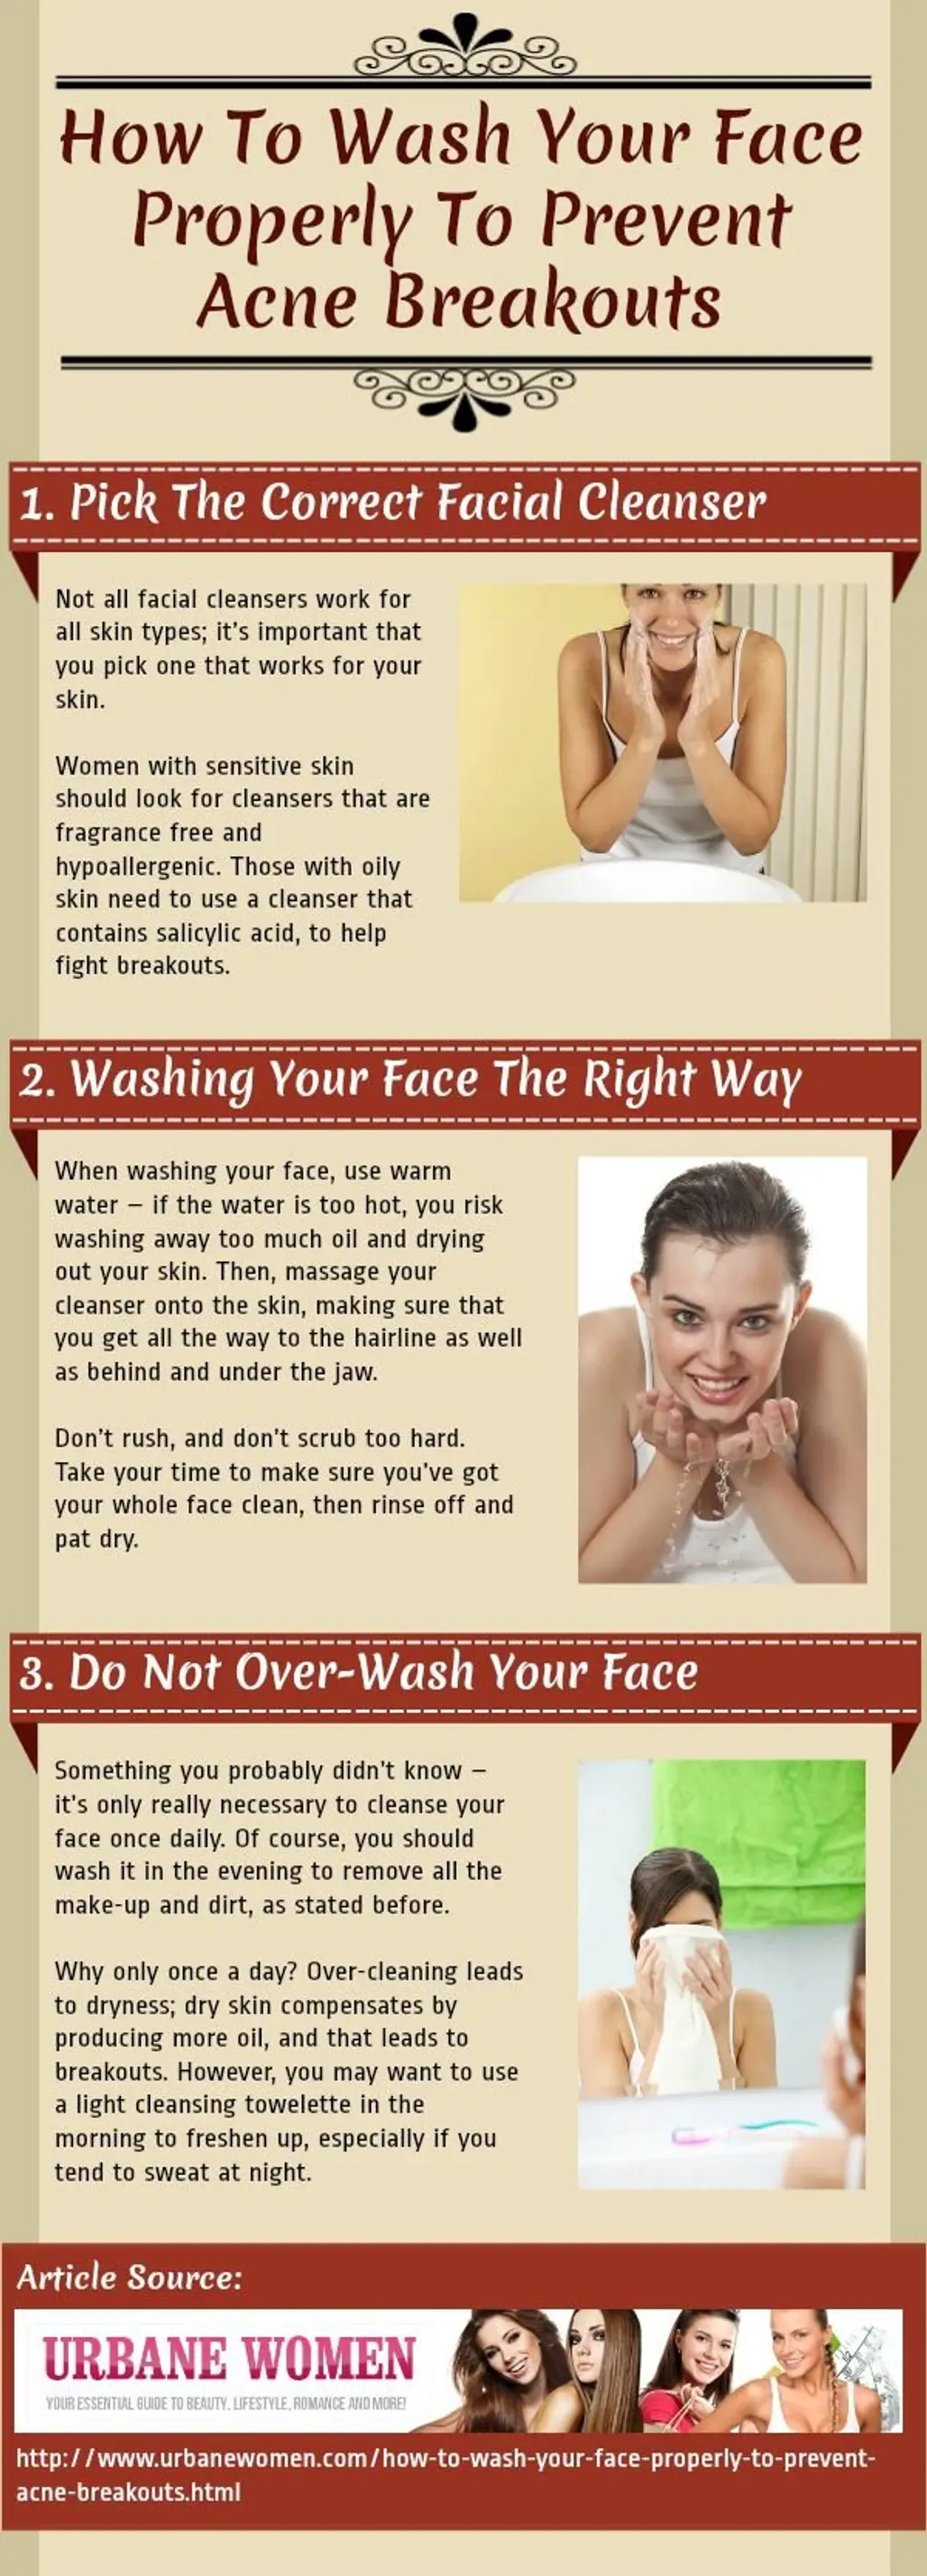 How to Wash Your Face Properly to Prevent Acne Breakouts